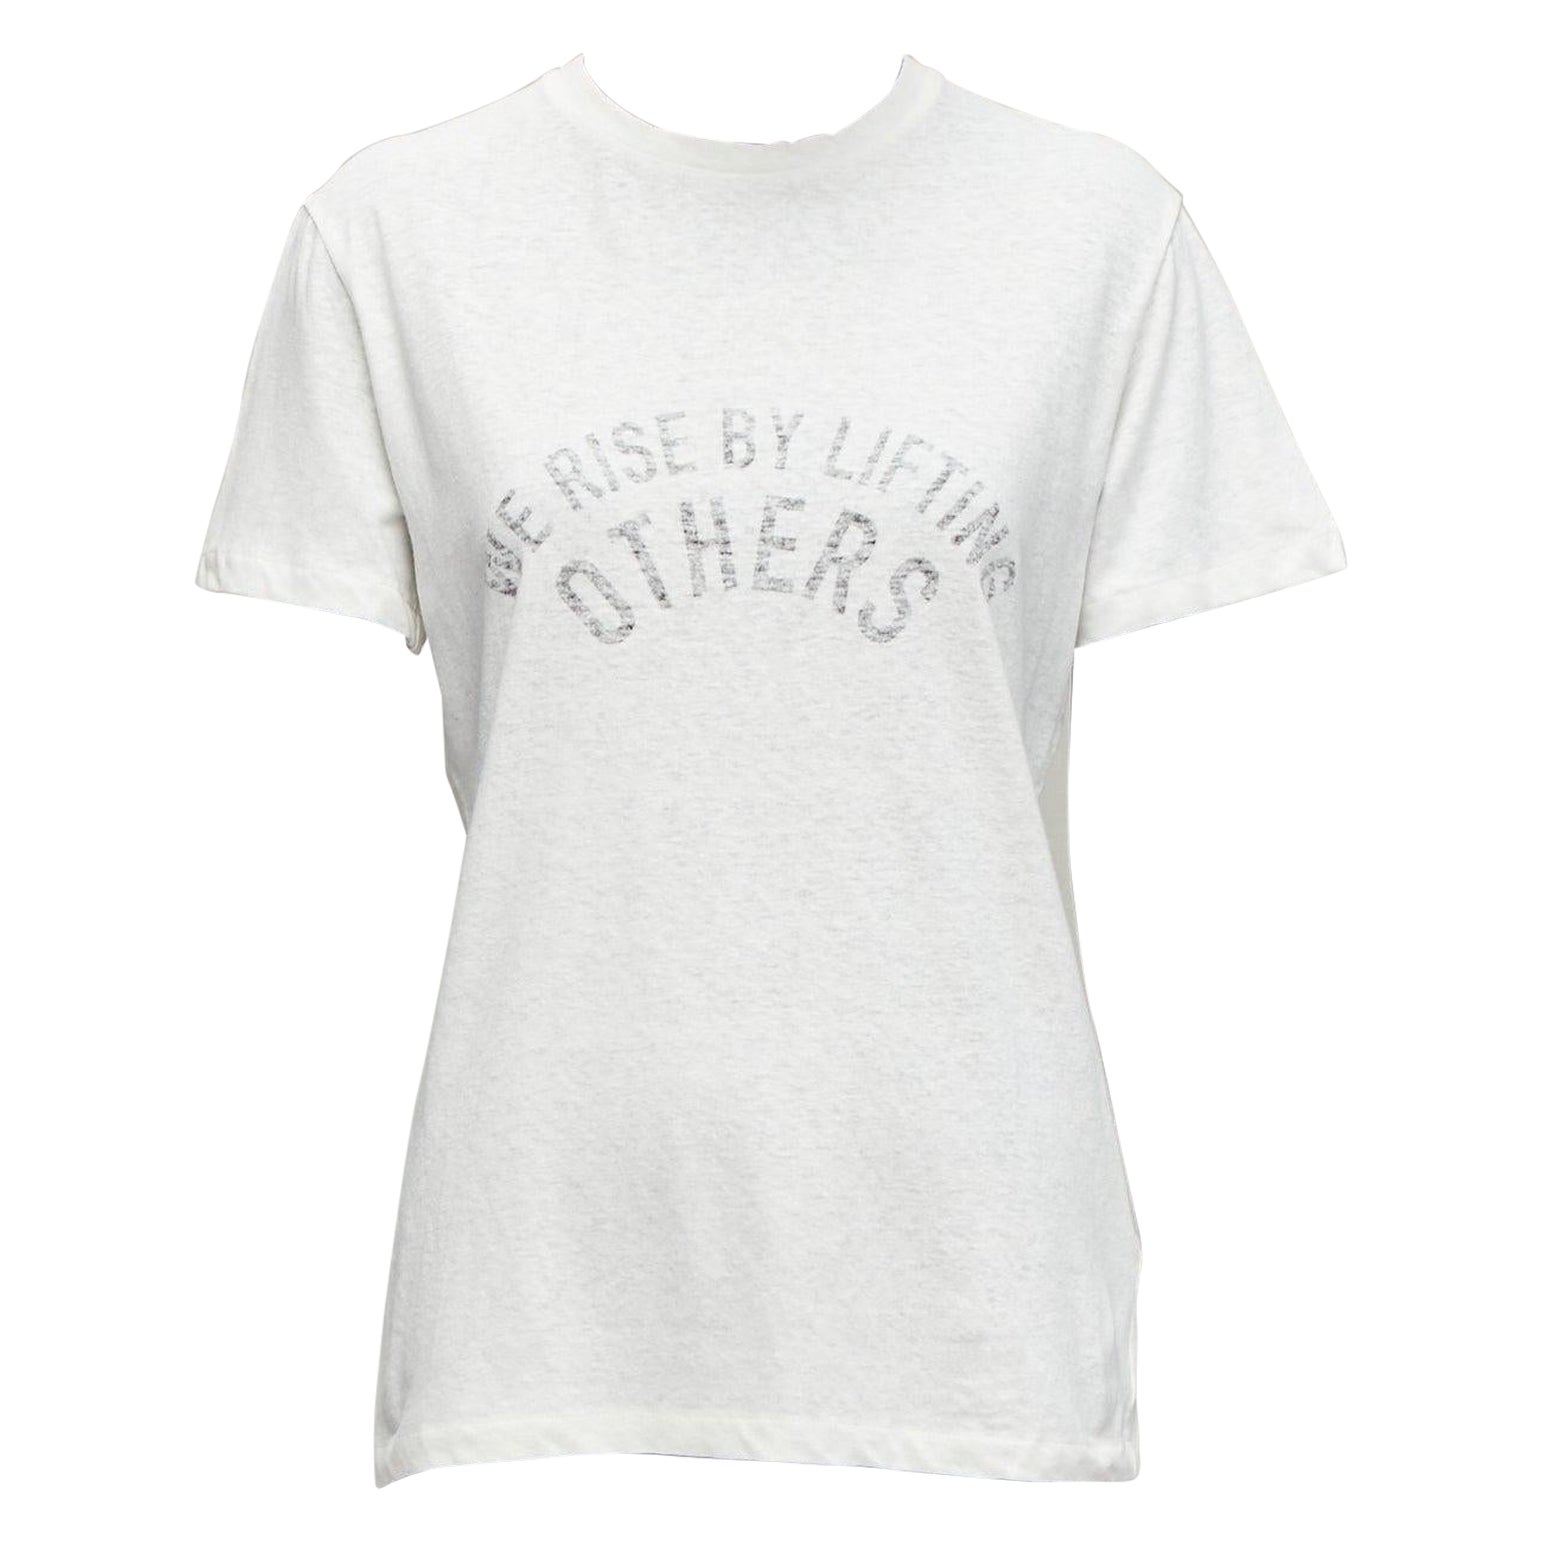 DIOR WE Rise By Lifting Others reversed print cotton linen white tshirt XS For Sale